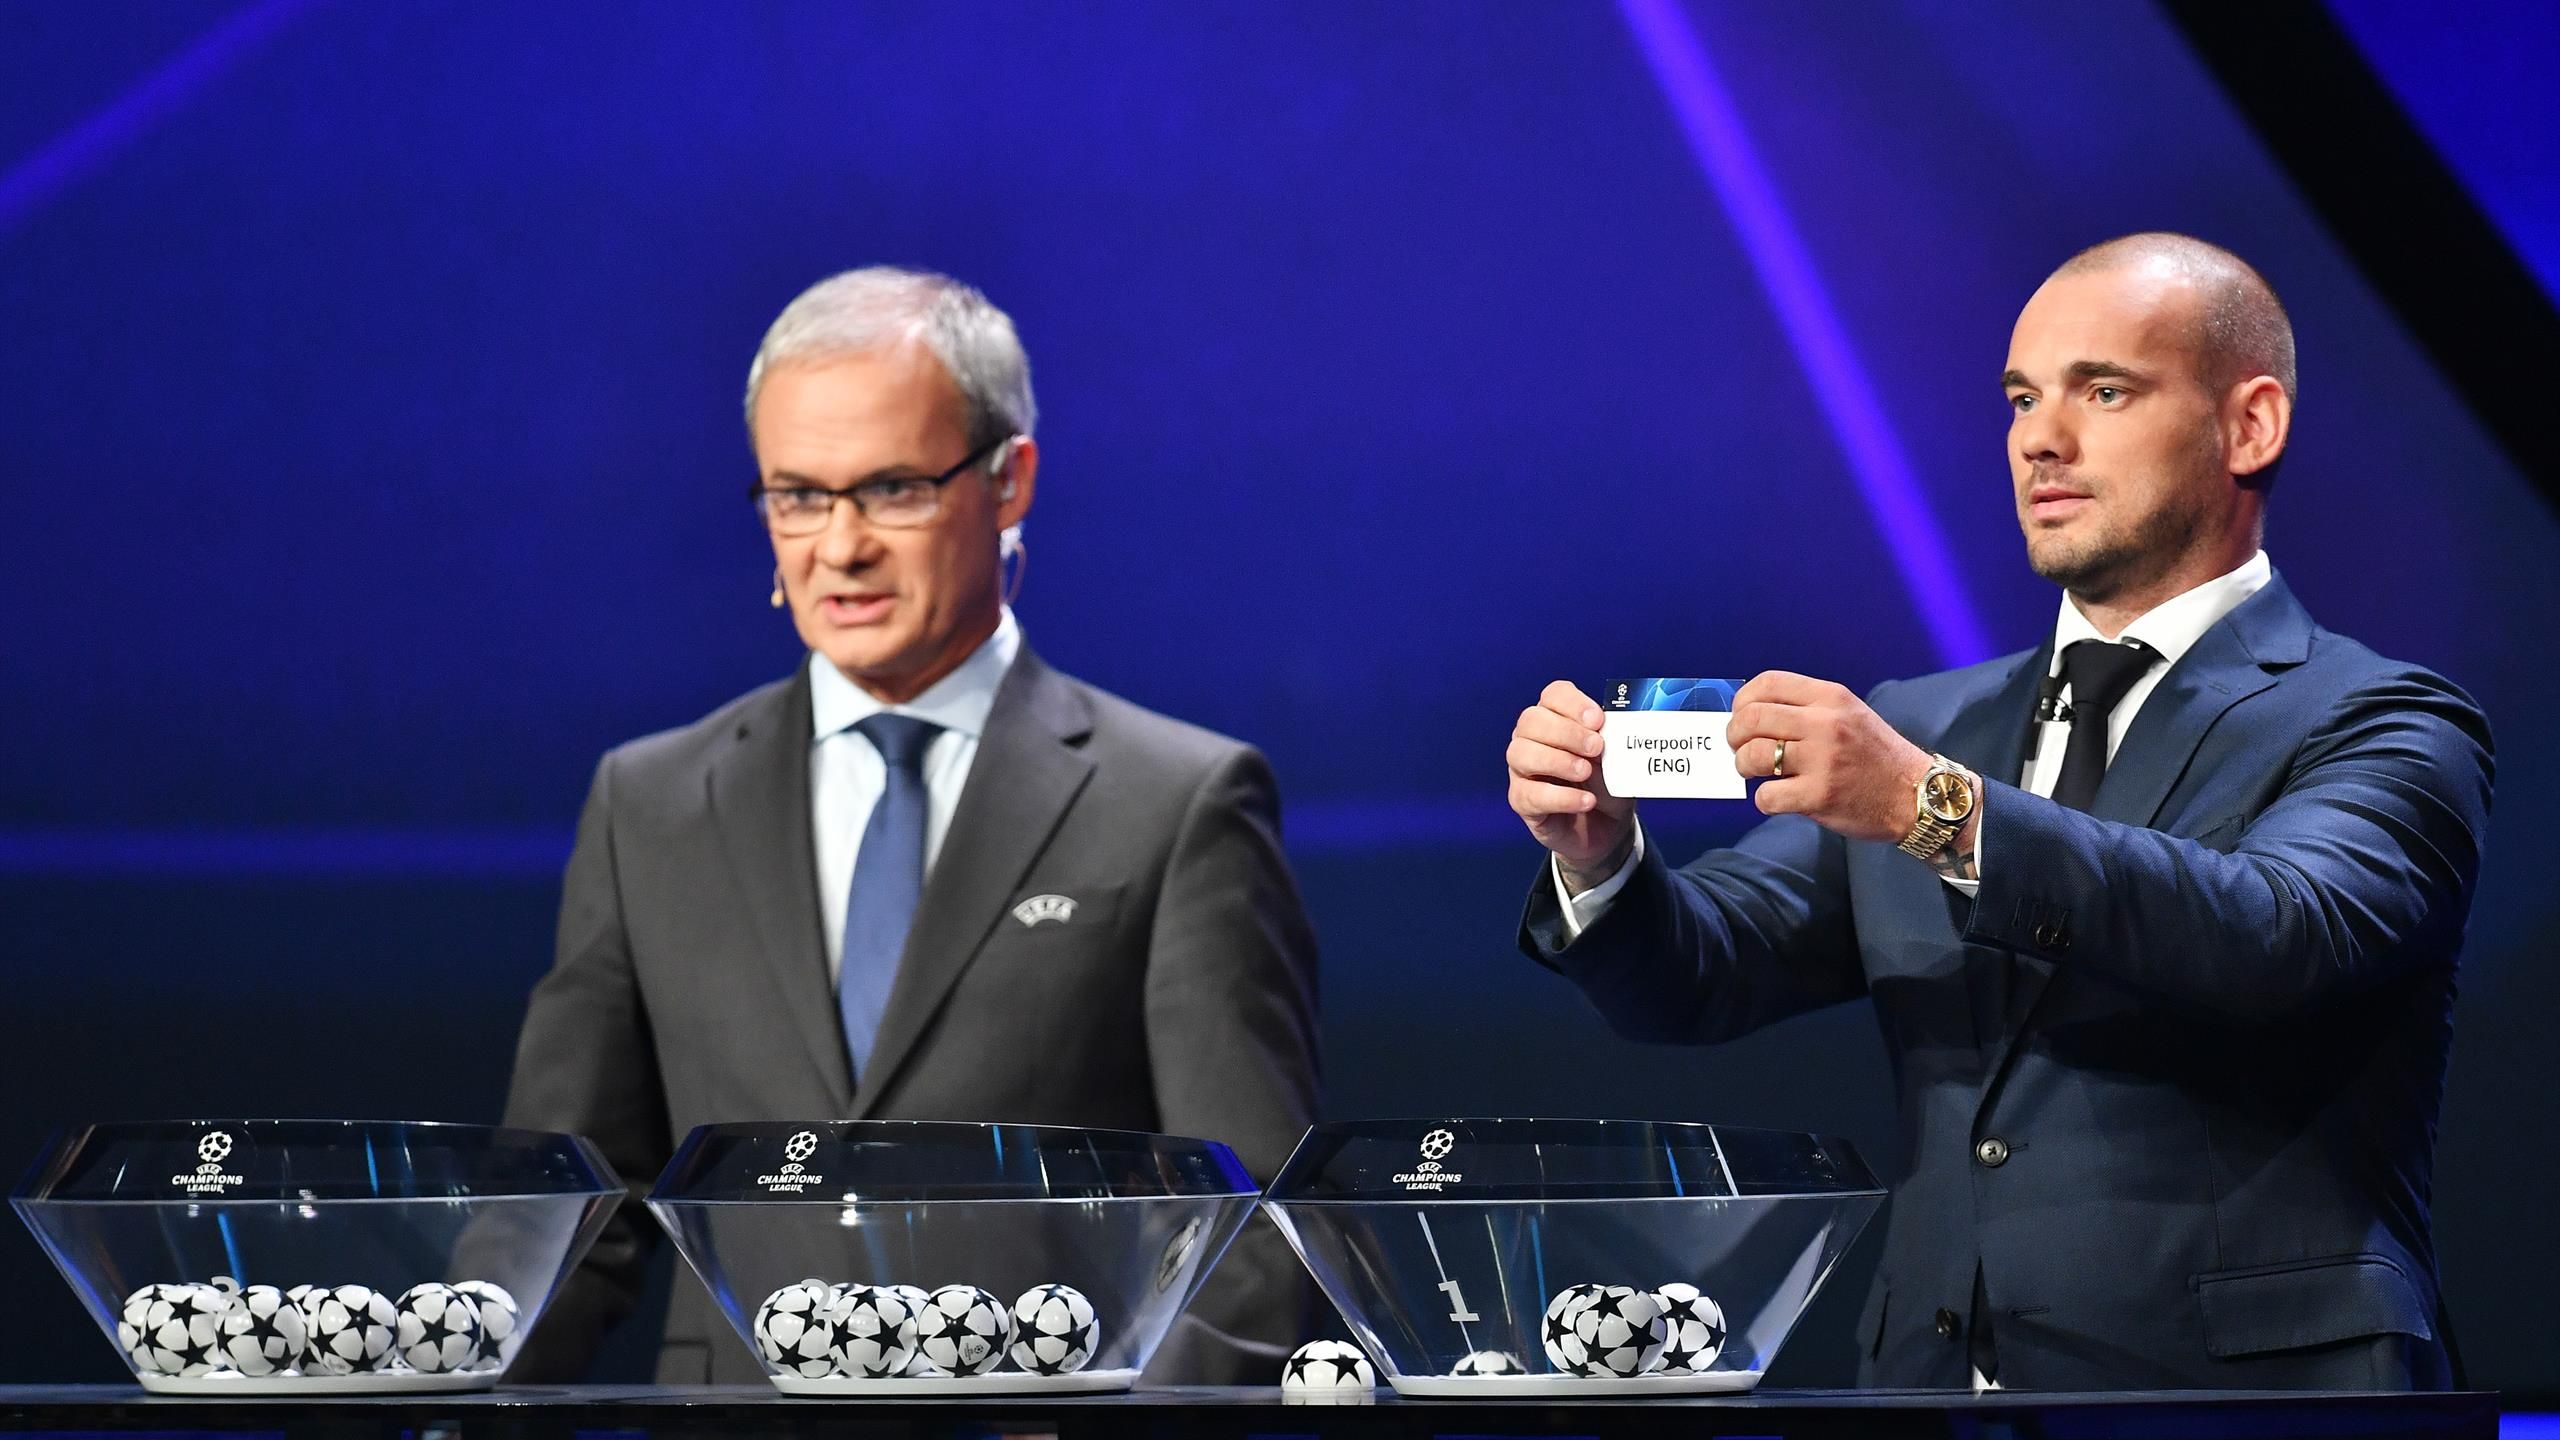 2022/23 UEFA Champions League: When are the draws, What are the match dates,  Where is the 2023 final | Intel Region